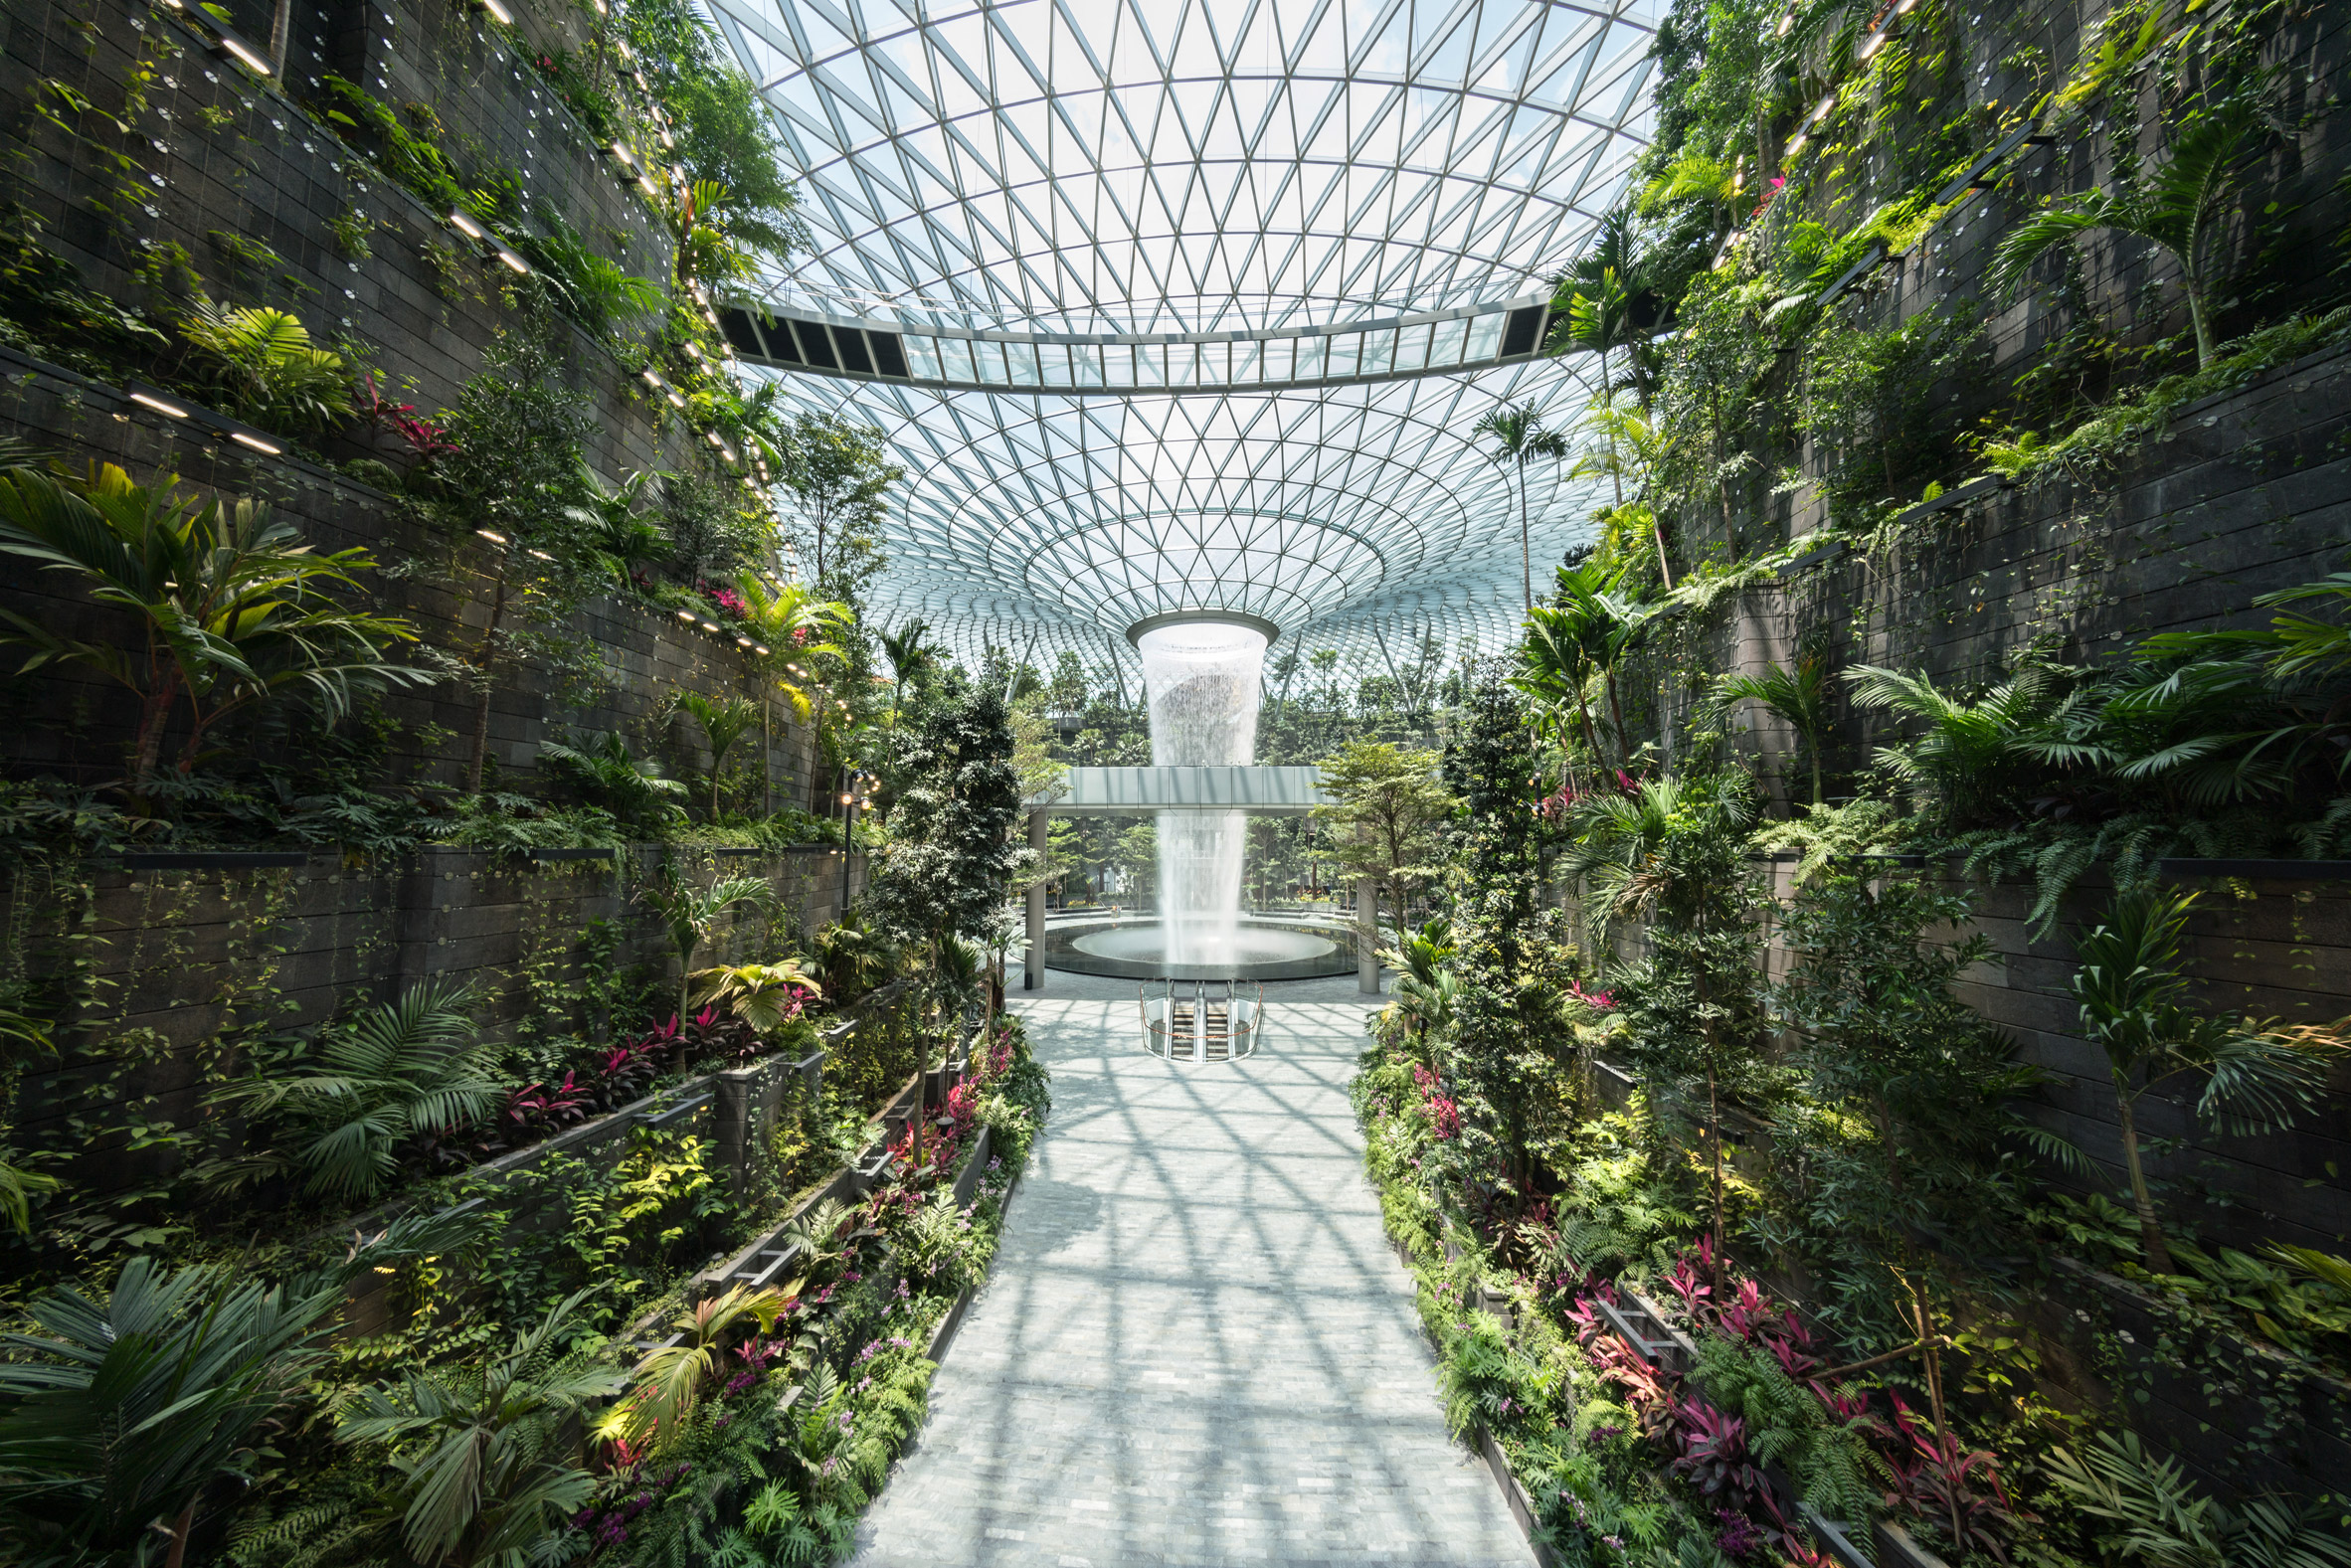 WAF World Building of the Year: Jewel Changi Airport building by Safdie Architects